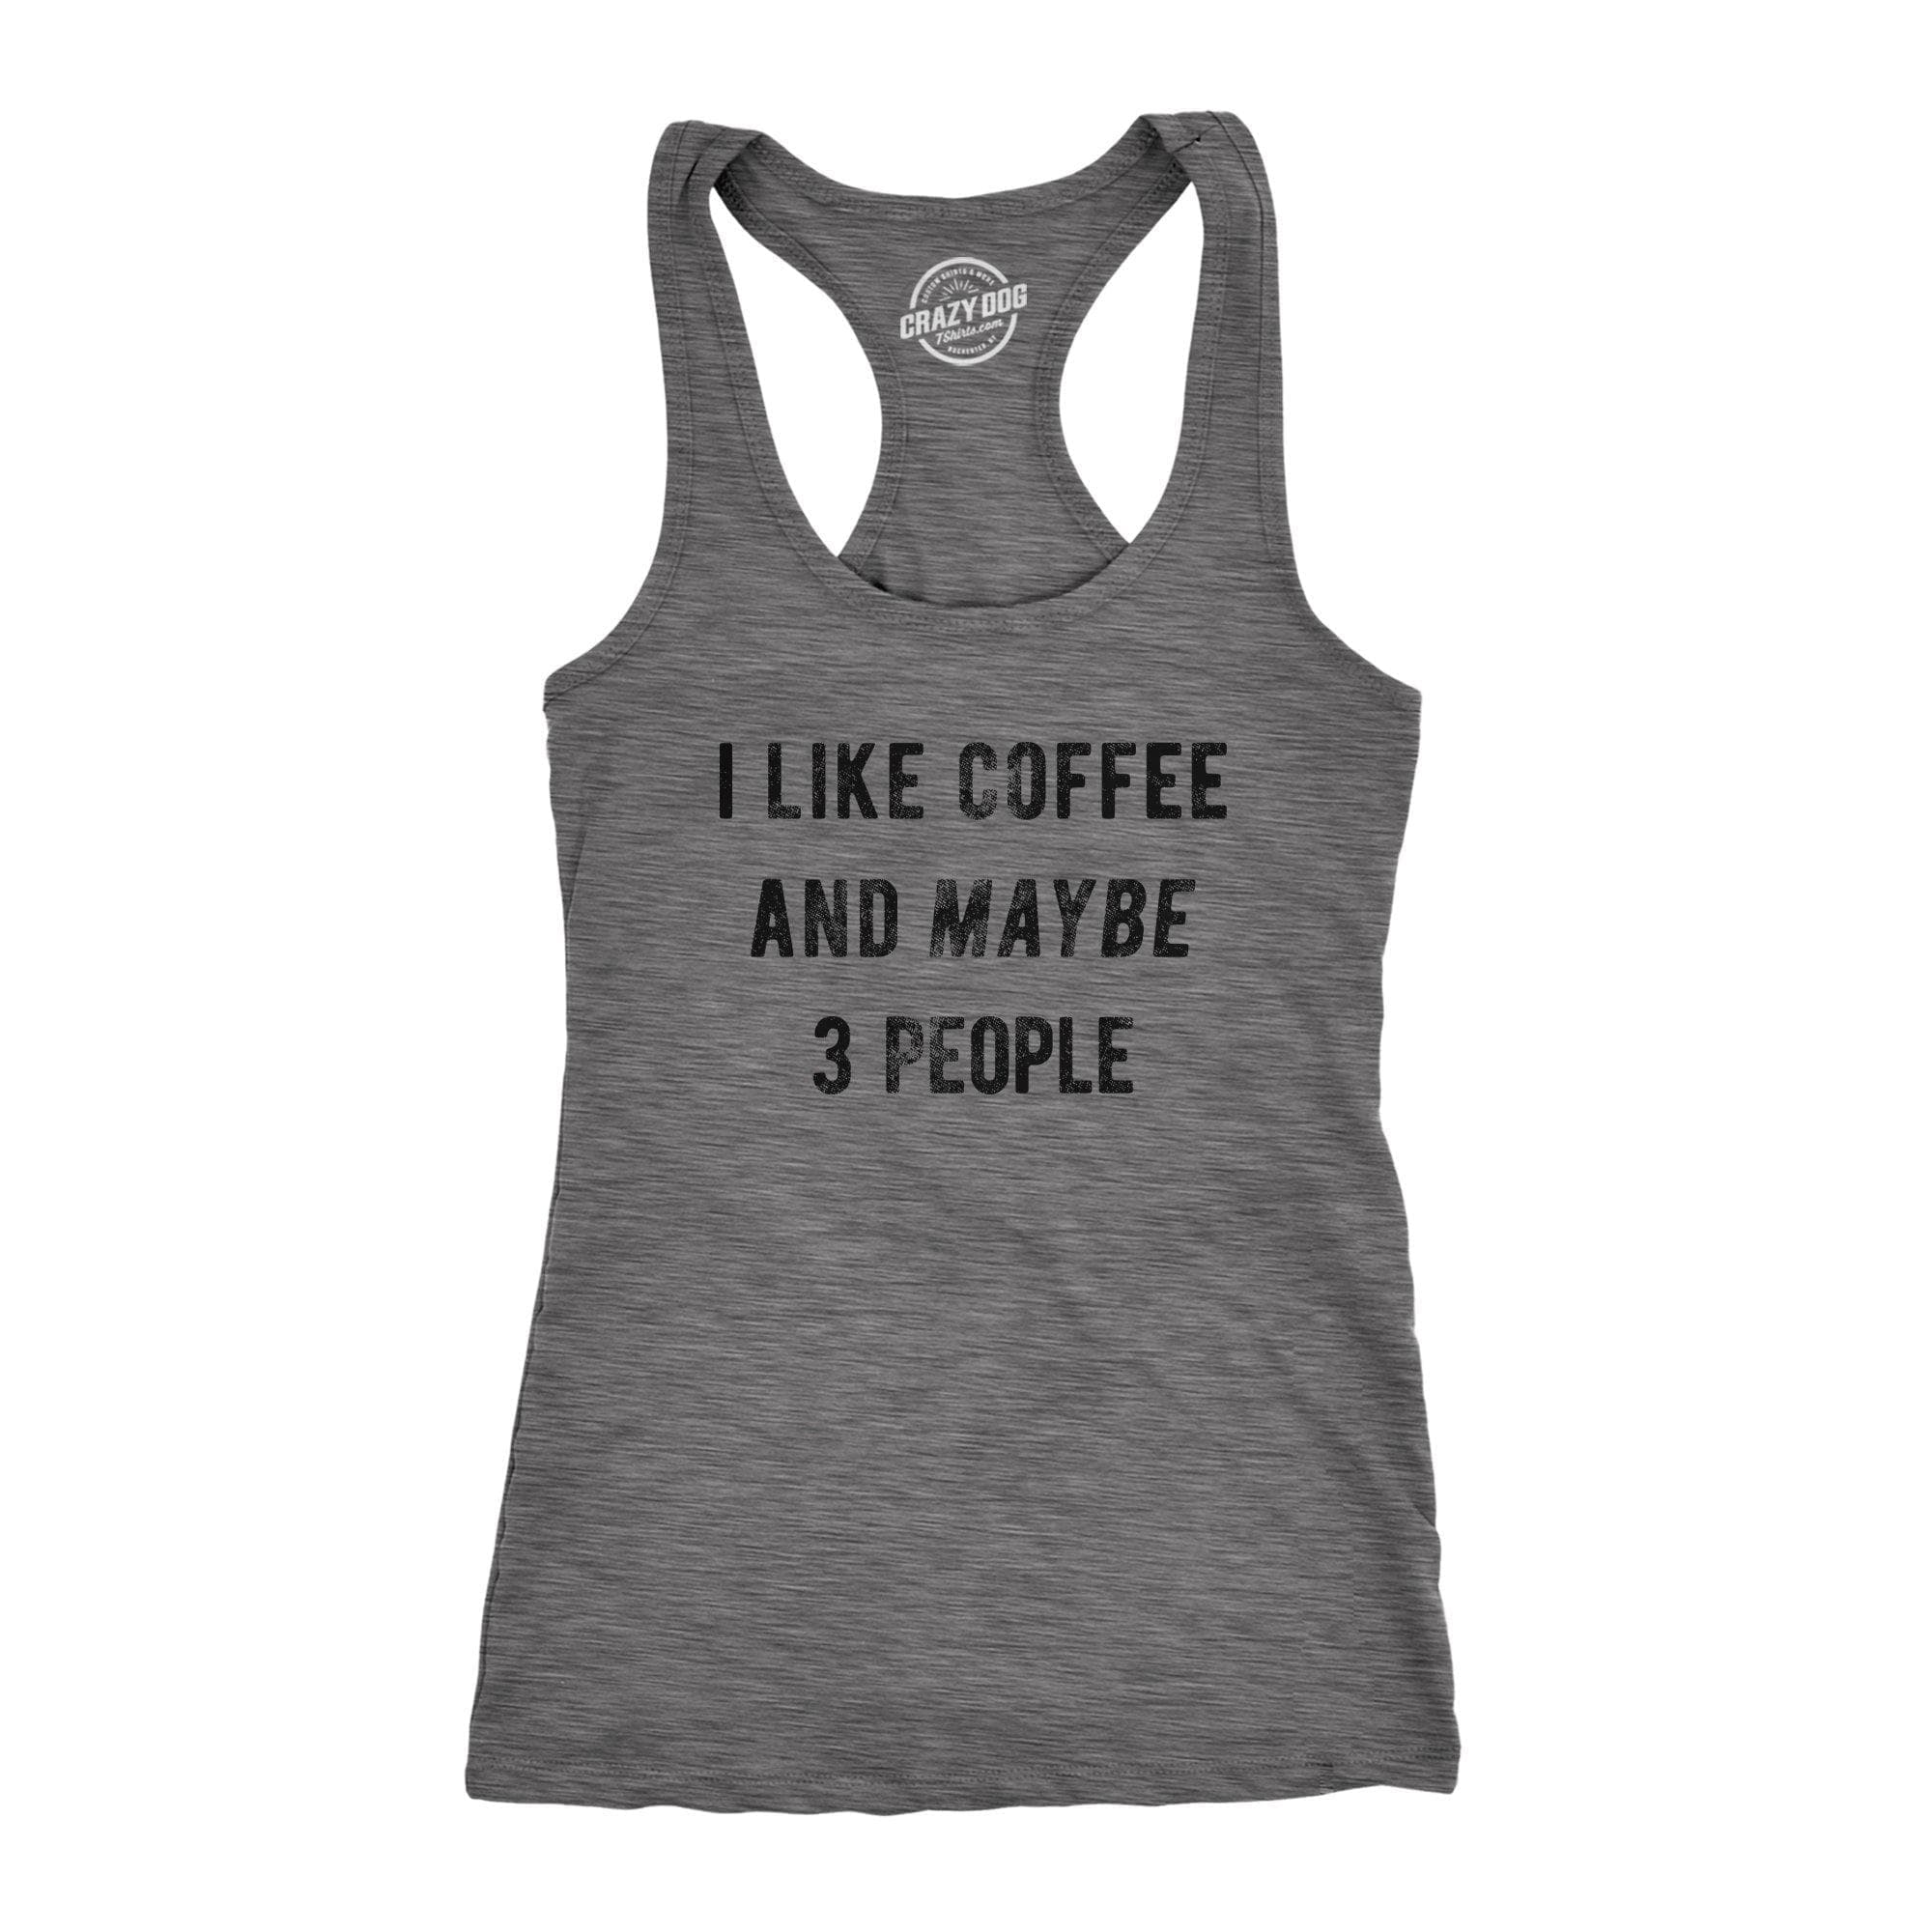 I Like Coffee And Maybe 3 People Women's Tank Top - Crazy Dog T-Shirts